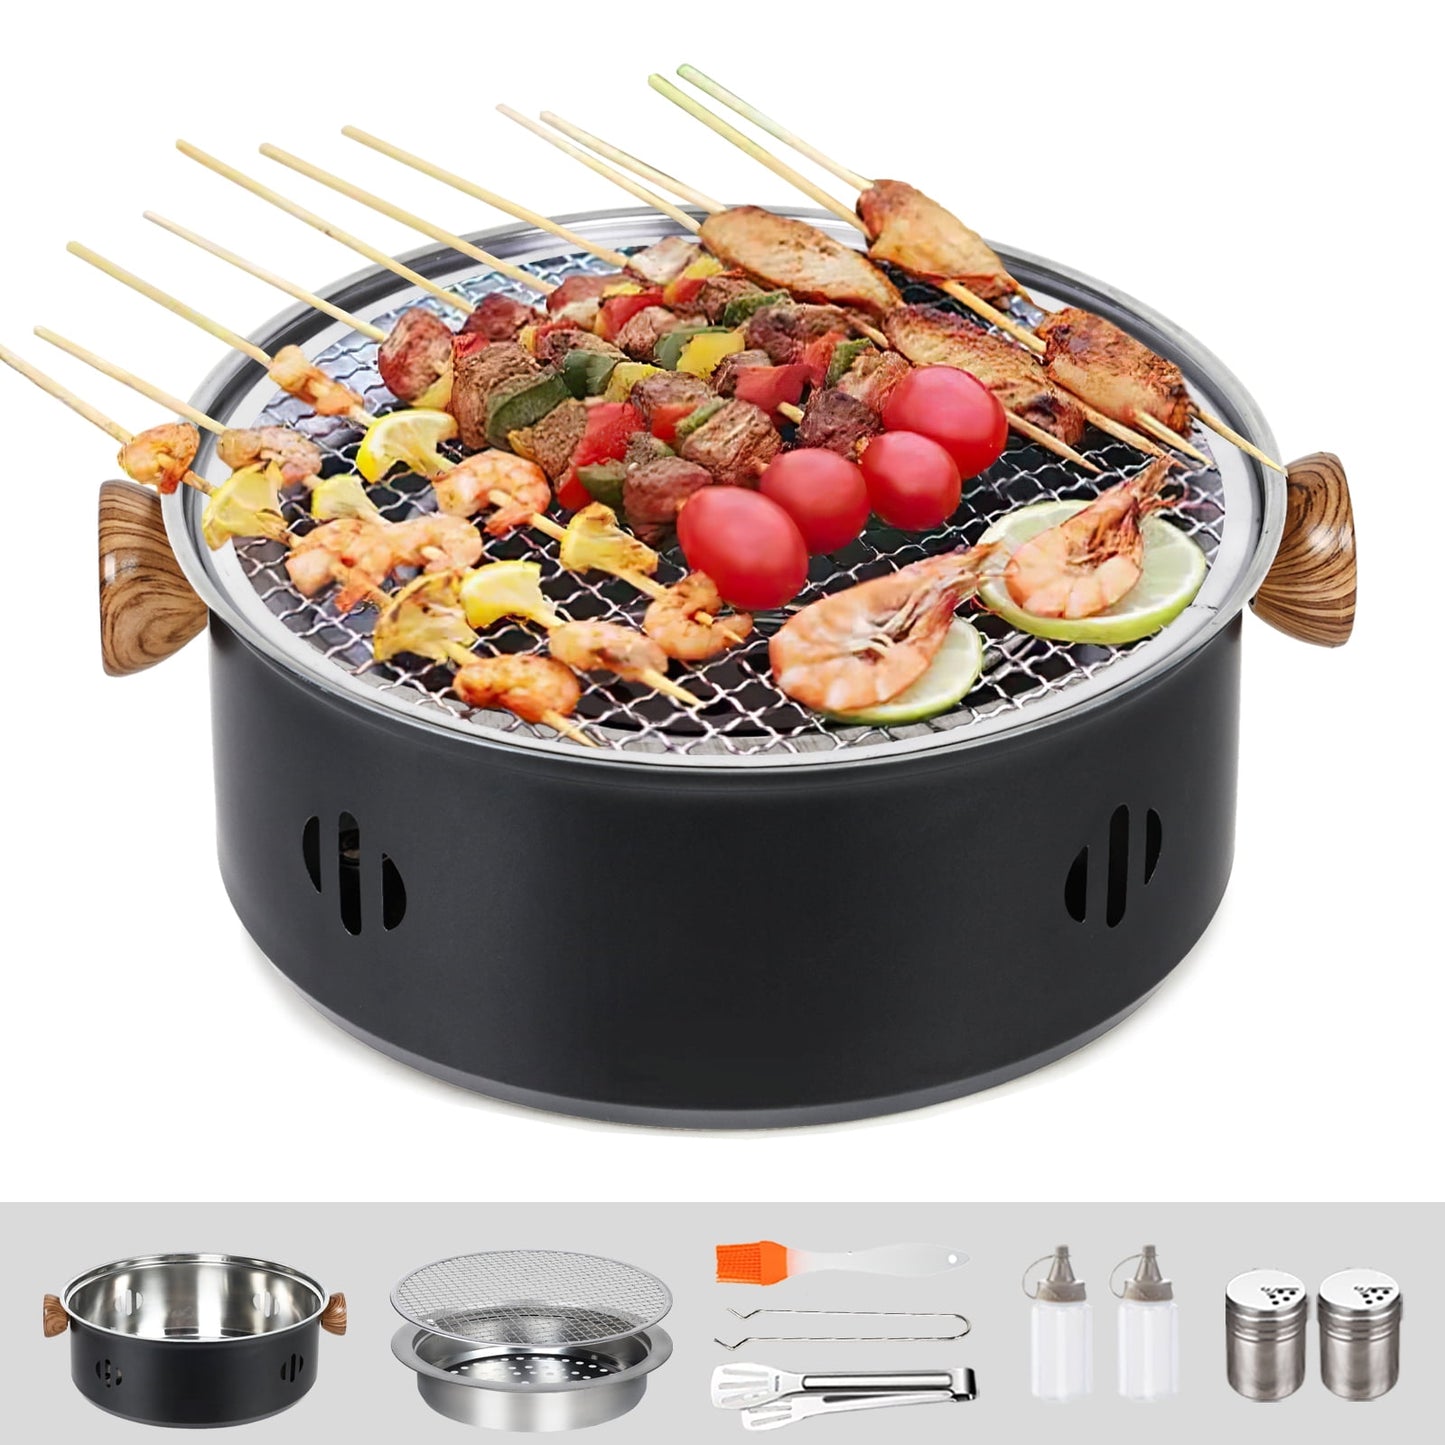 Exclusivo Mezcla 12.5-Inch Charcoal BBQ Grill, Portable Small Camping Grill, Tabletop Korean Barbecue Grill for Home Party and Outdoor Backyard Cooking, Black